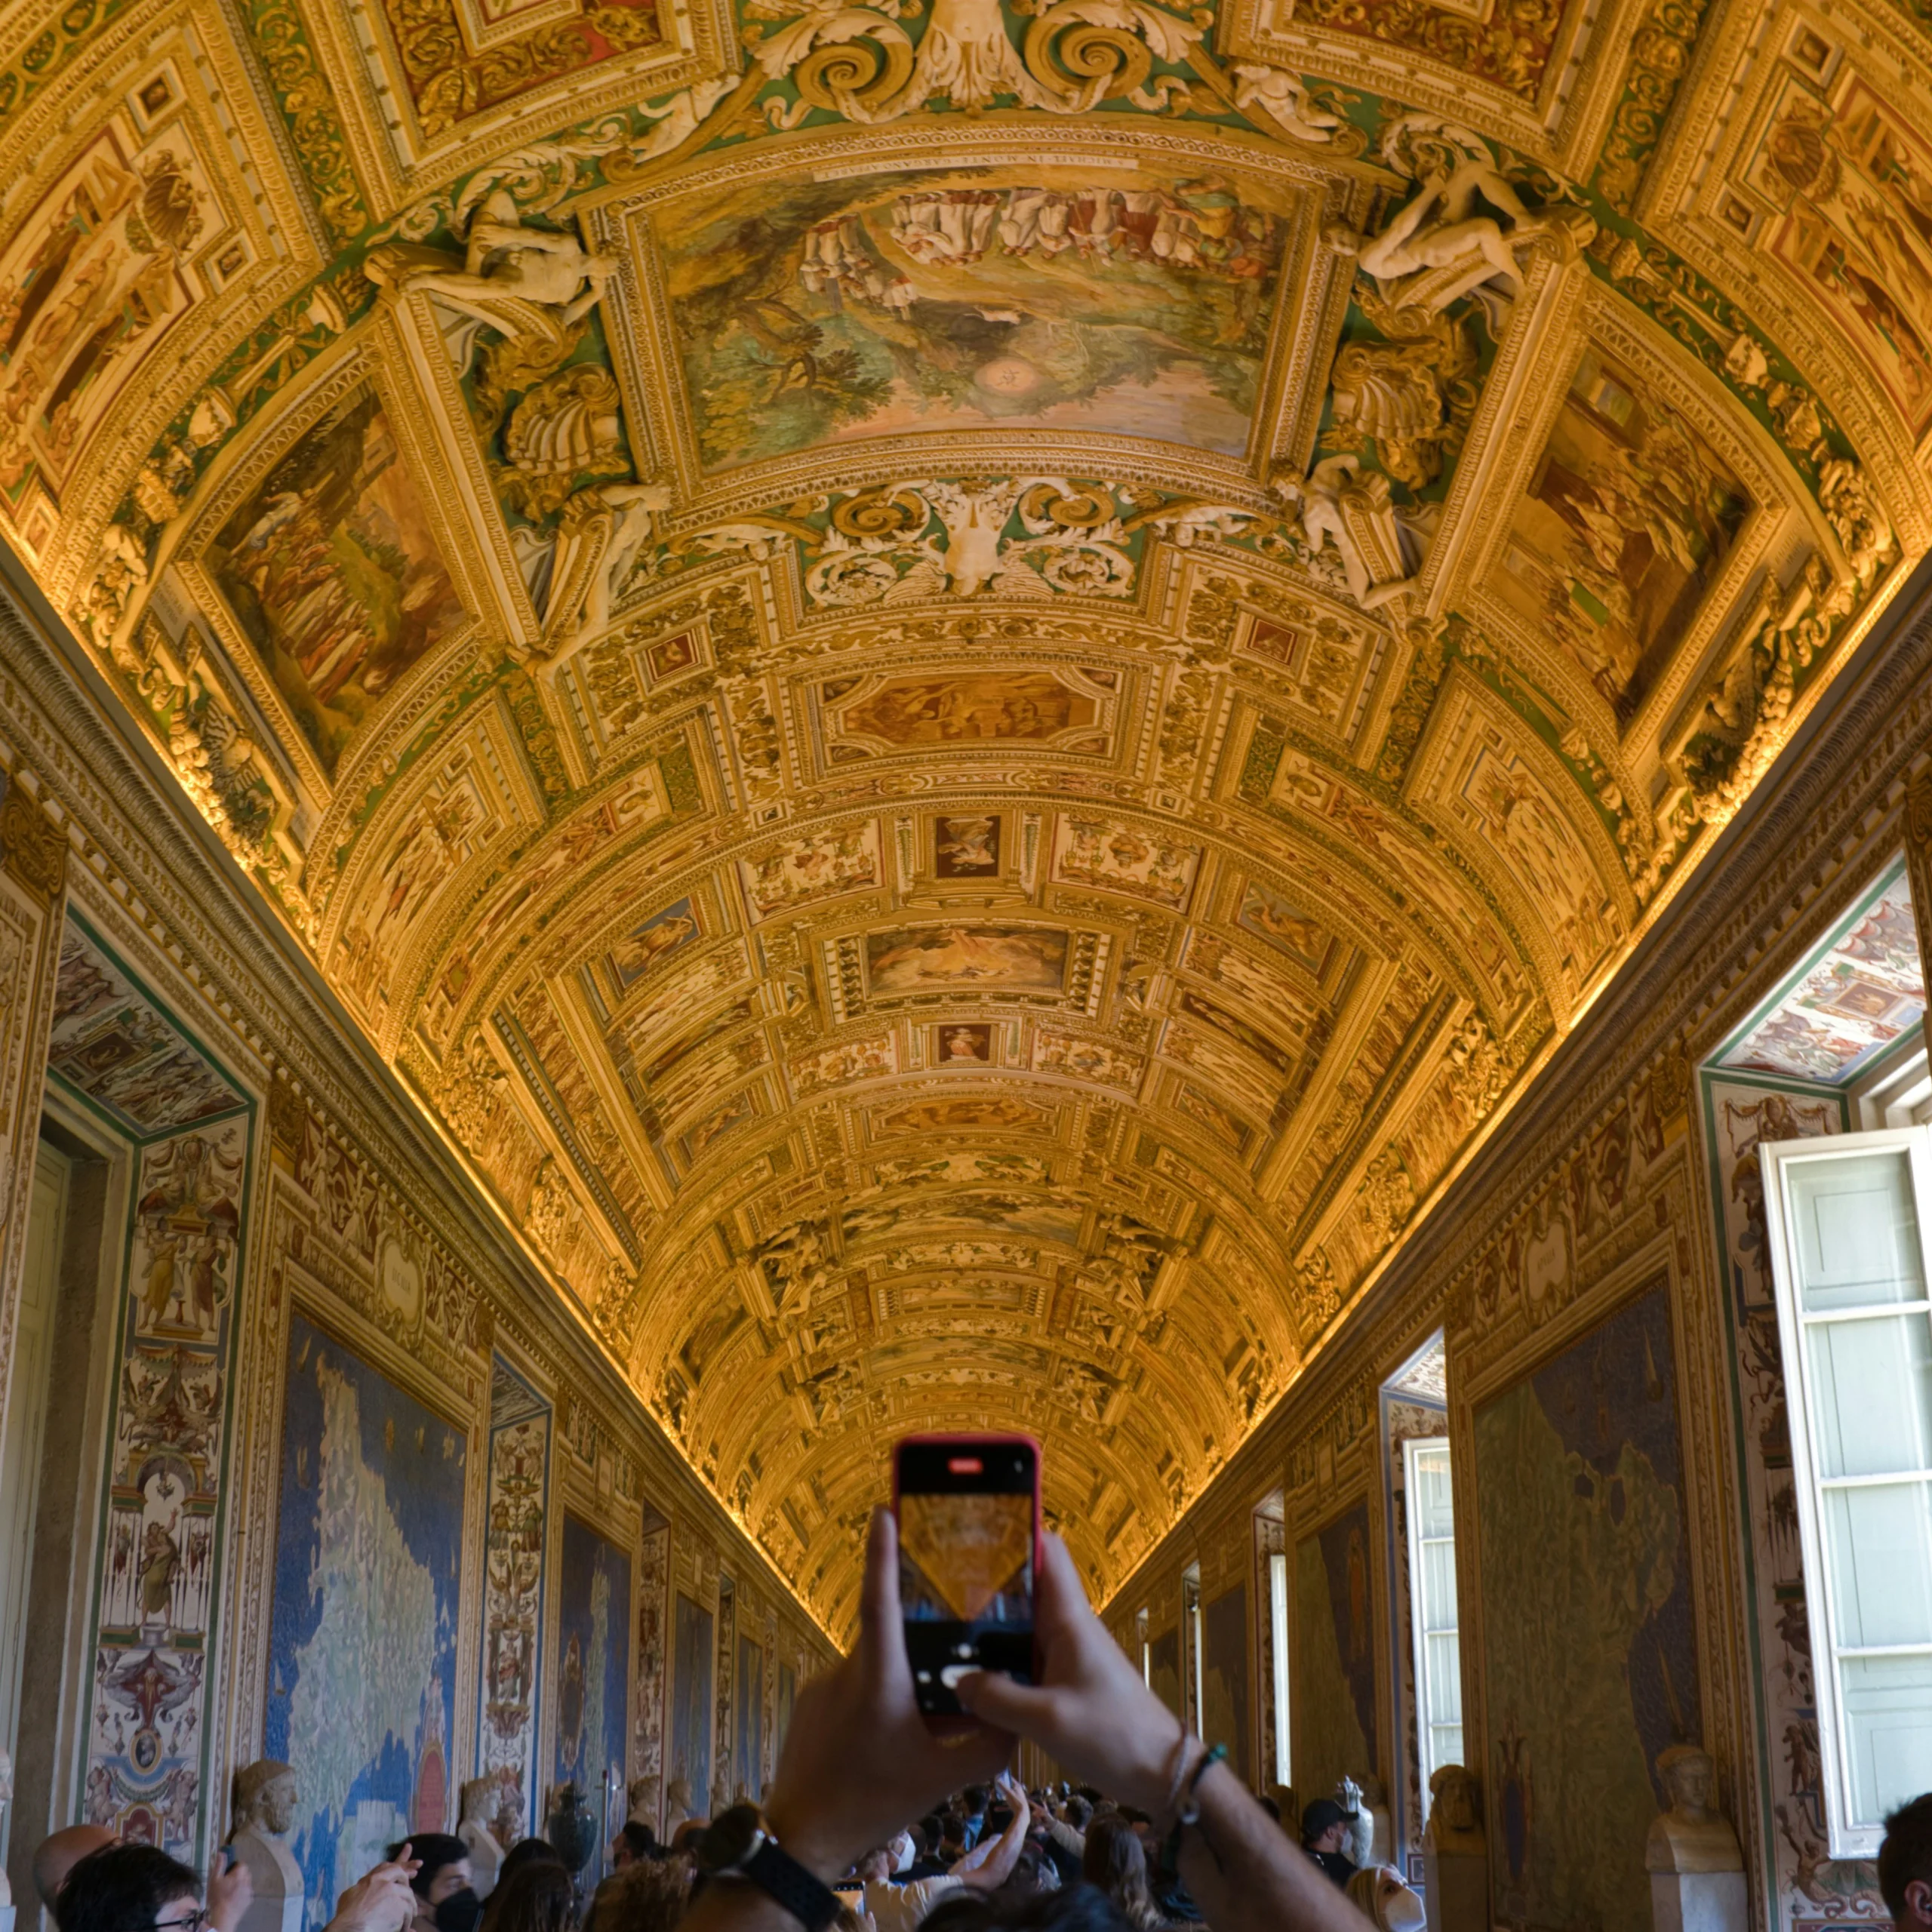 How can I avoid long queues when visiting the Vatican Museums and Sistine Chapel?